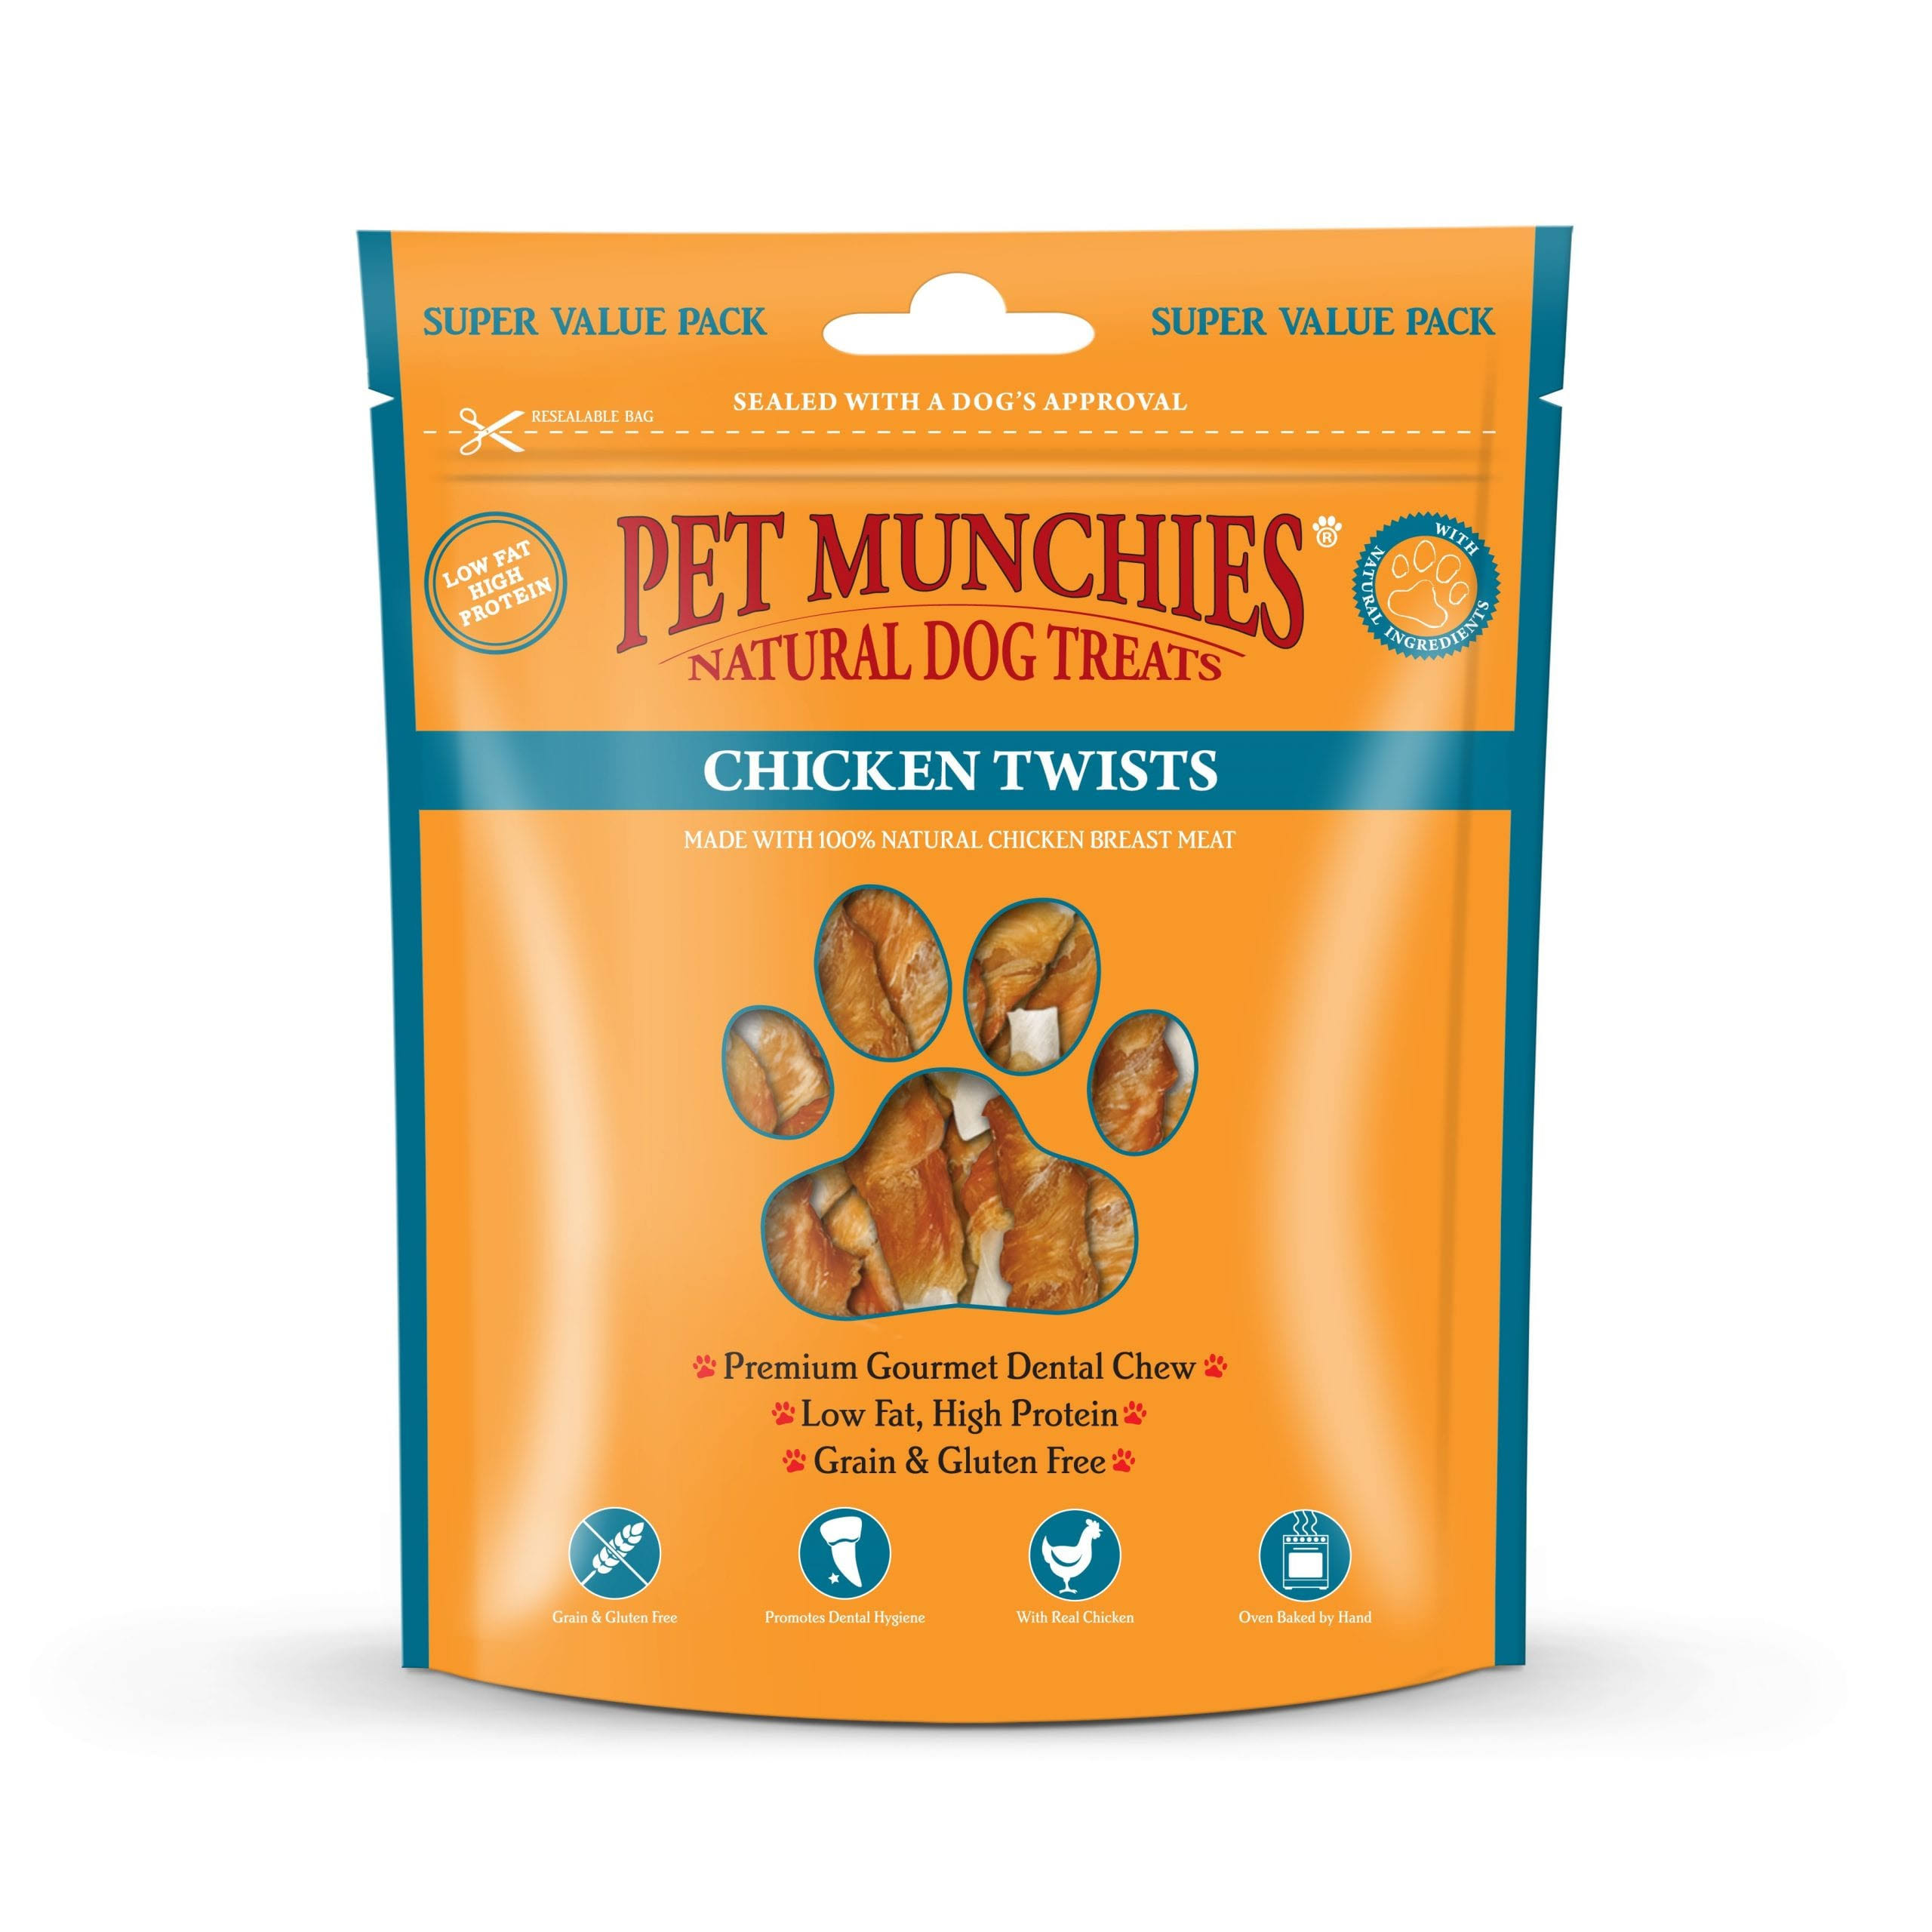 1x Pet Munchies 100% Natural Chicken Twists Treats Healthy Meat Dog Food 290g